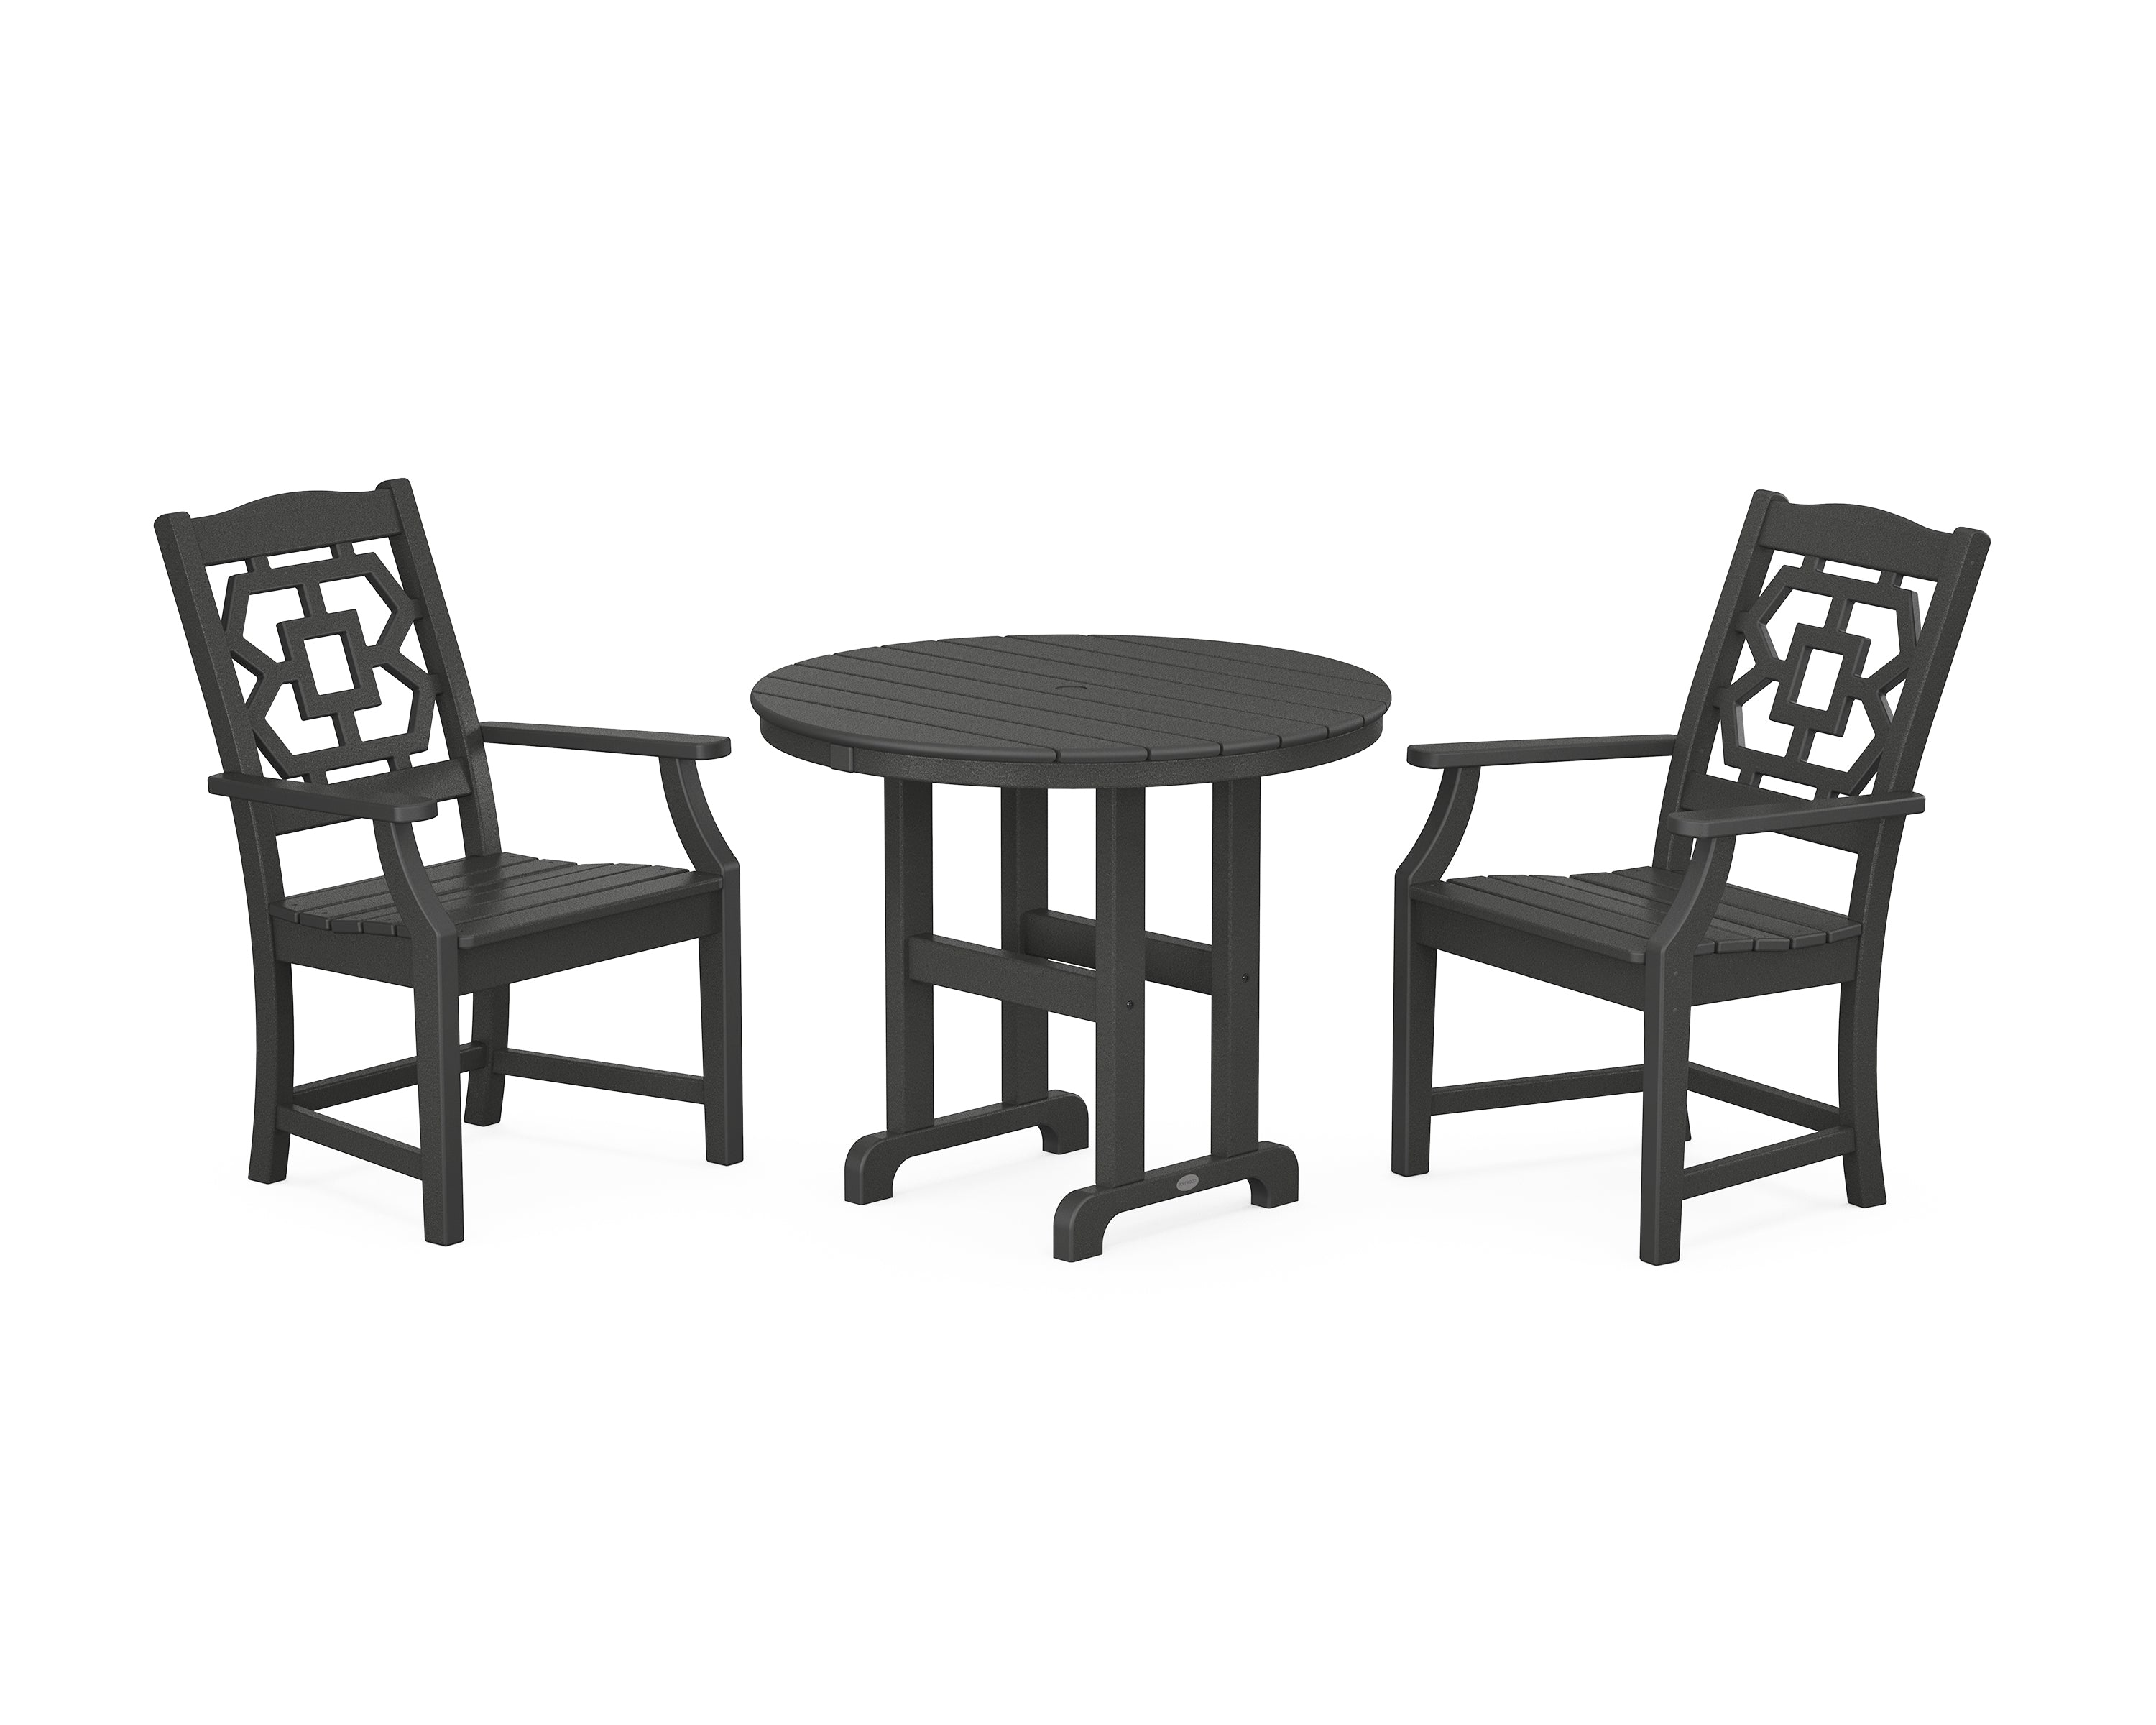 Martha Stewart by POLYWOOD® Chinoiserie 3-Piece Farmhouse Dining Set in Black